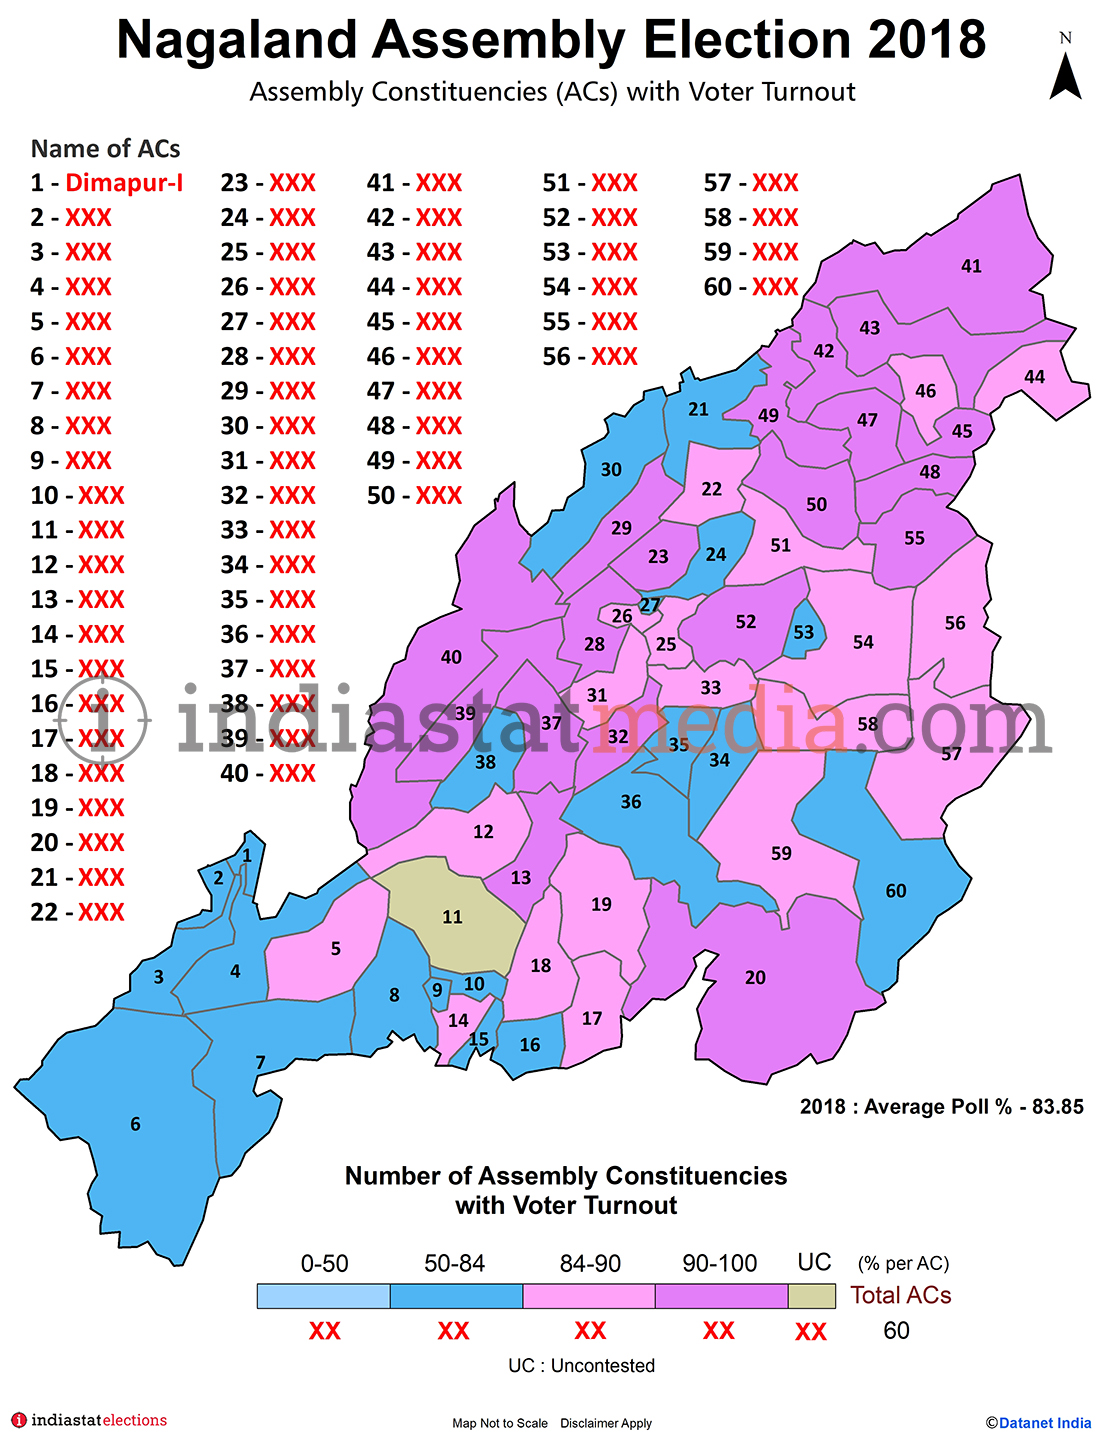 Assembly Constituencies (ACs) with Voter Turnout in Nagaland (Assembly Election - 2018)